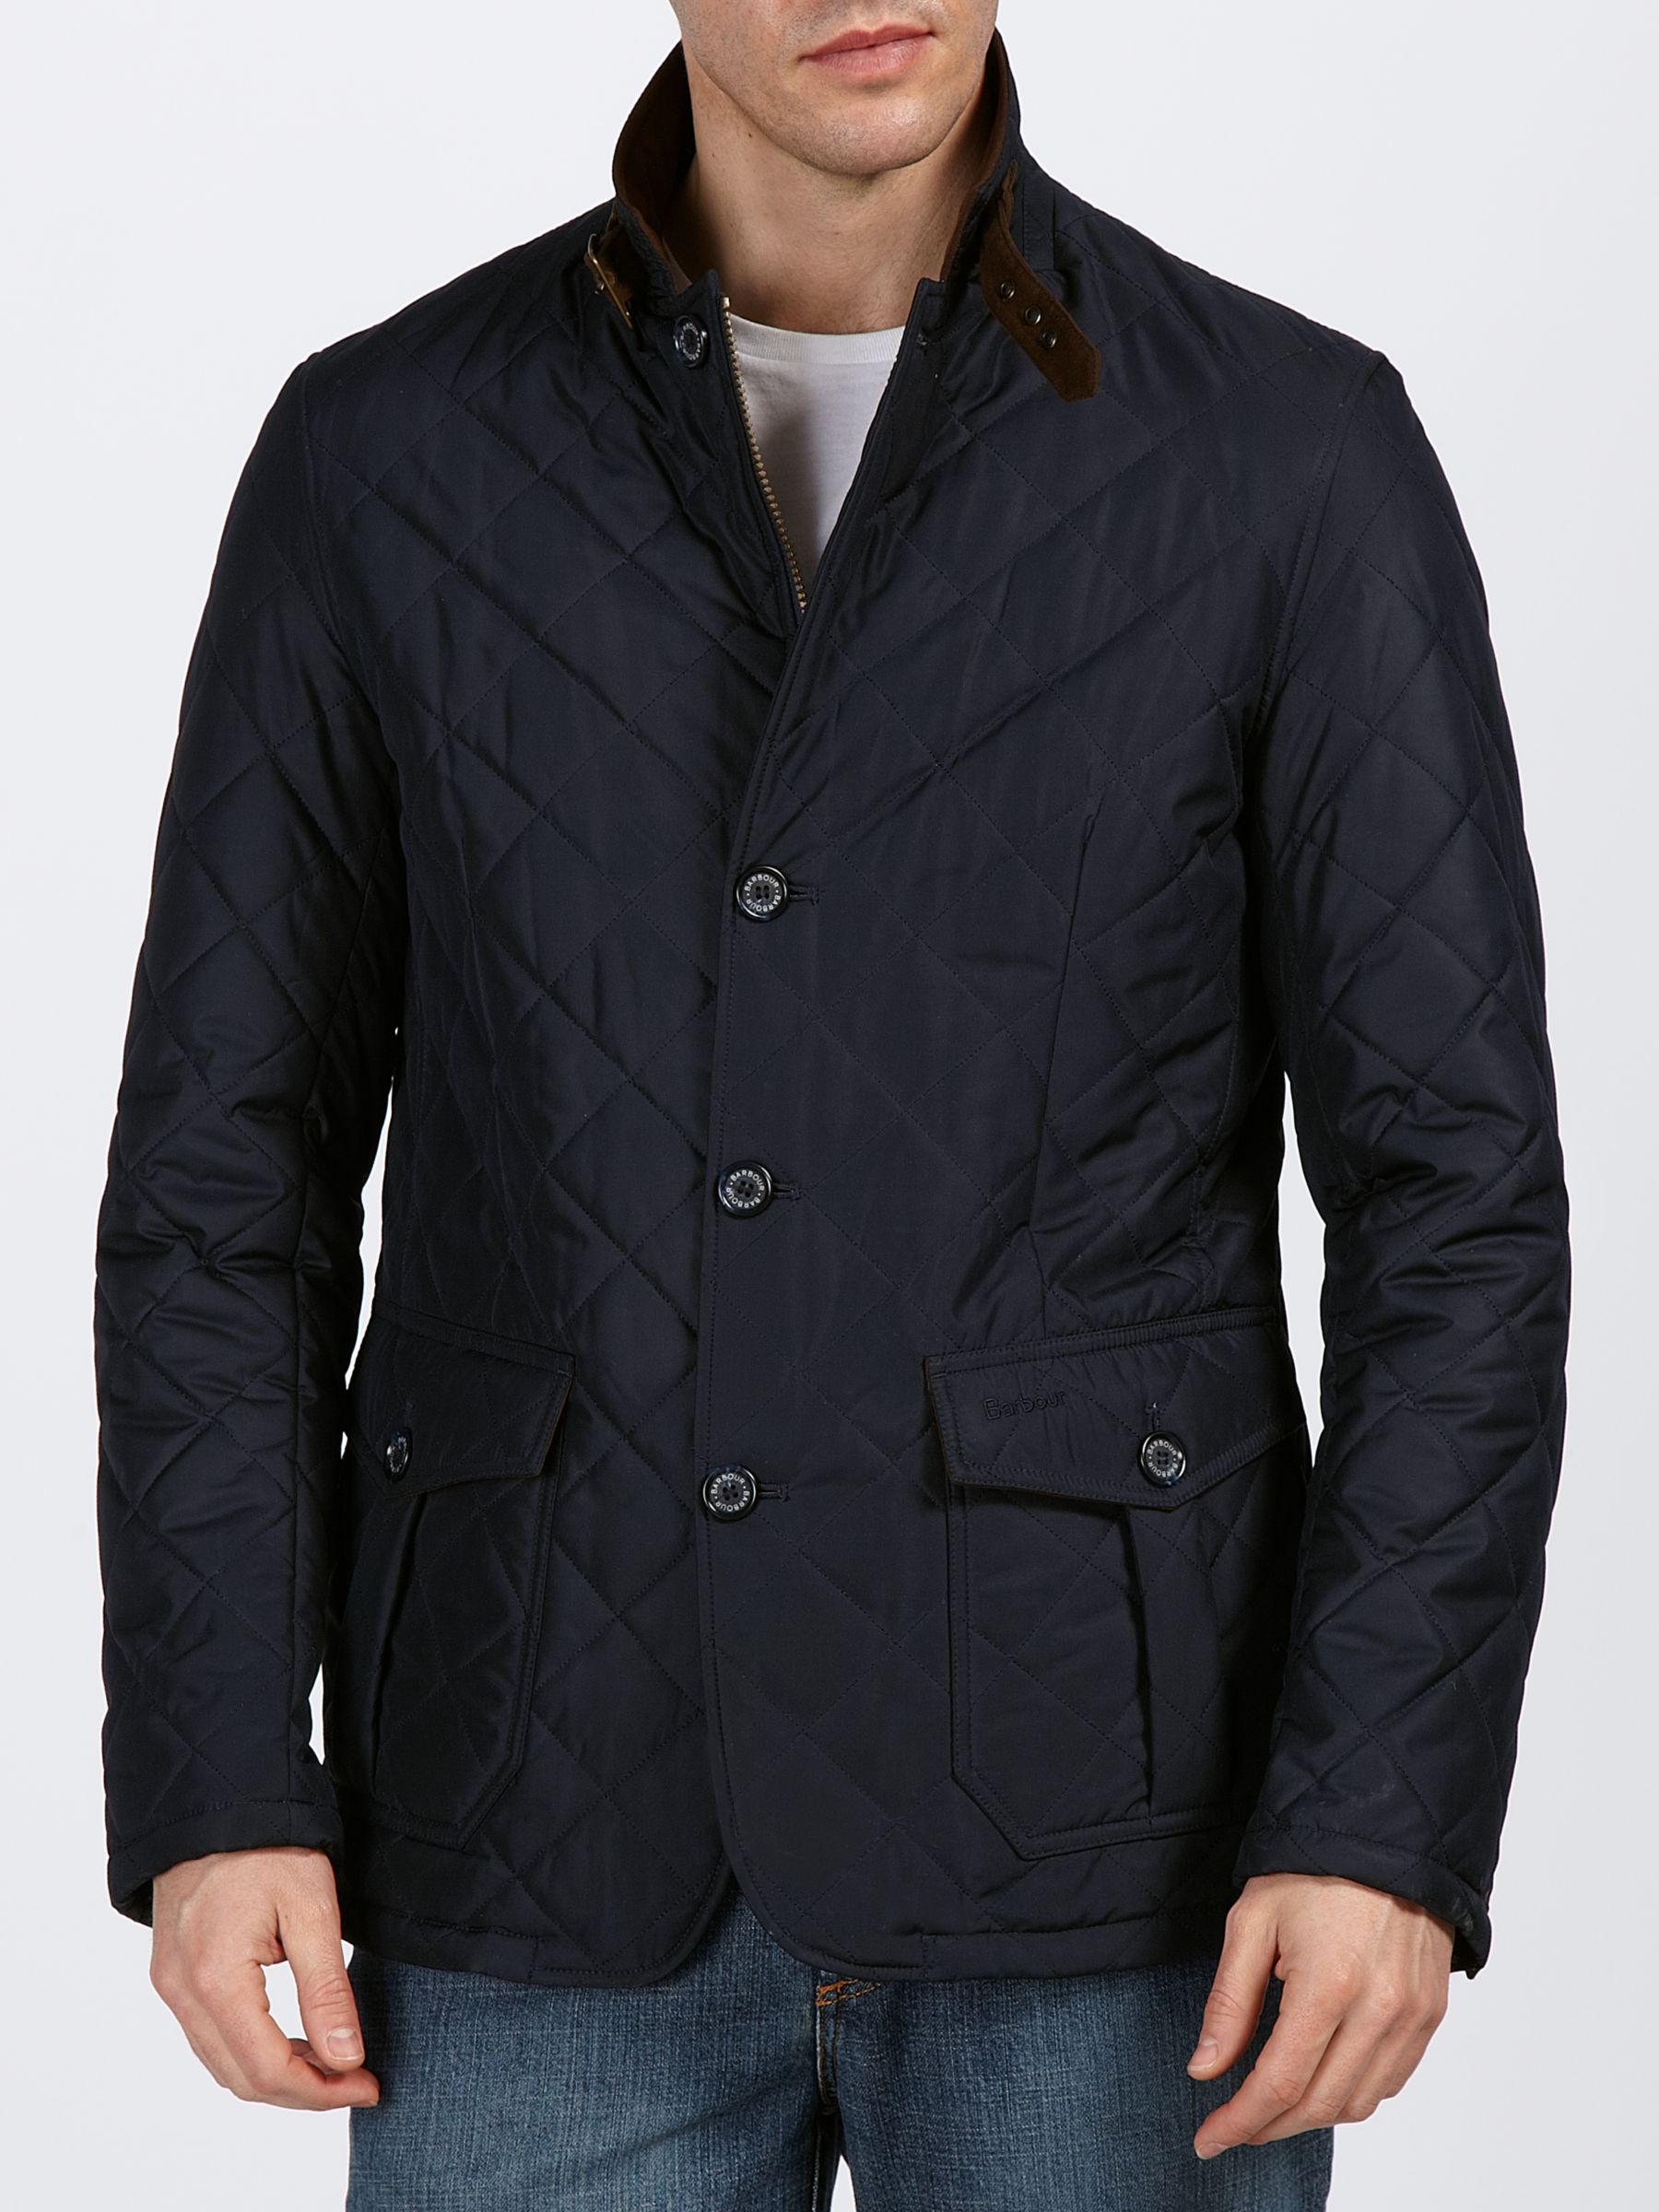 Barbour Quilted Lutz Jacket at John Lewis & Partners